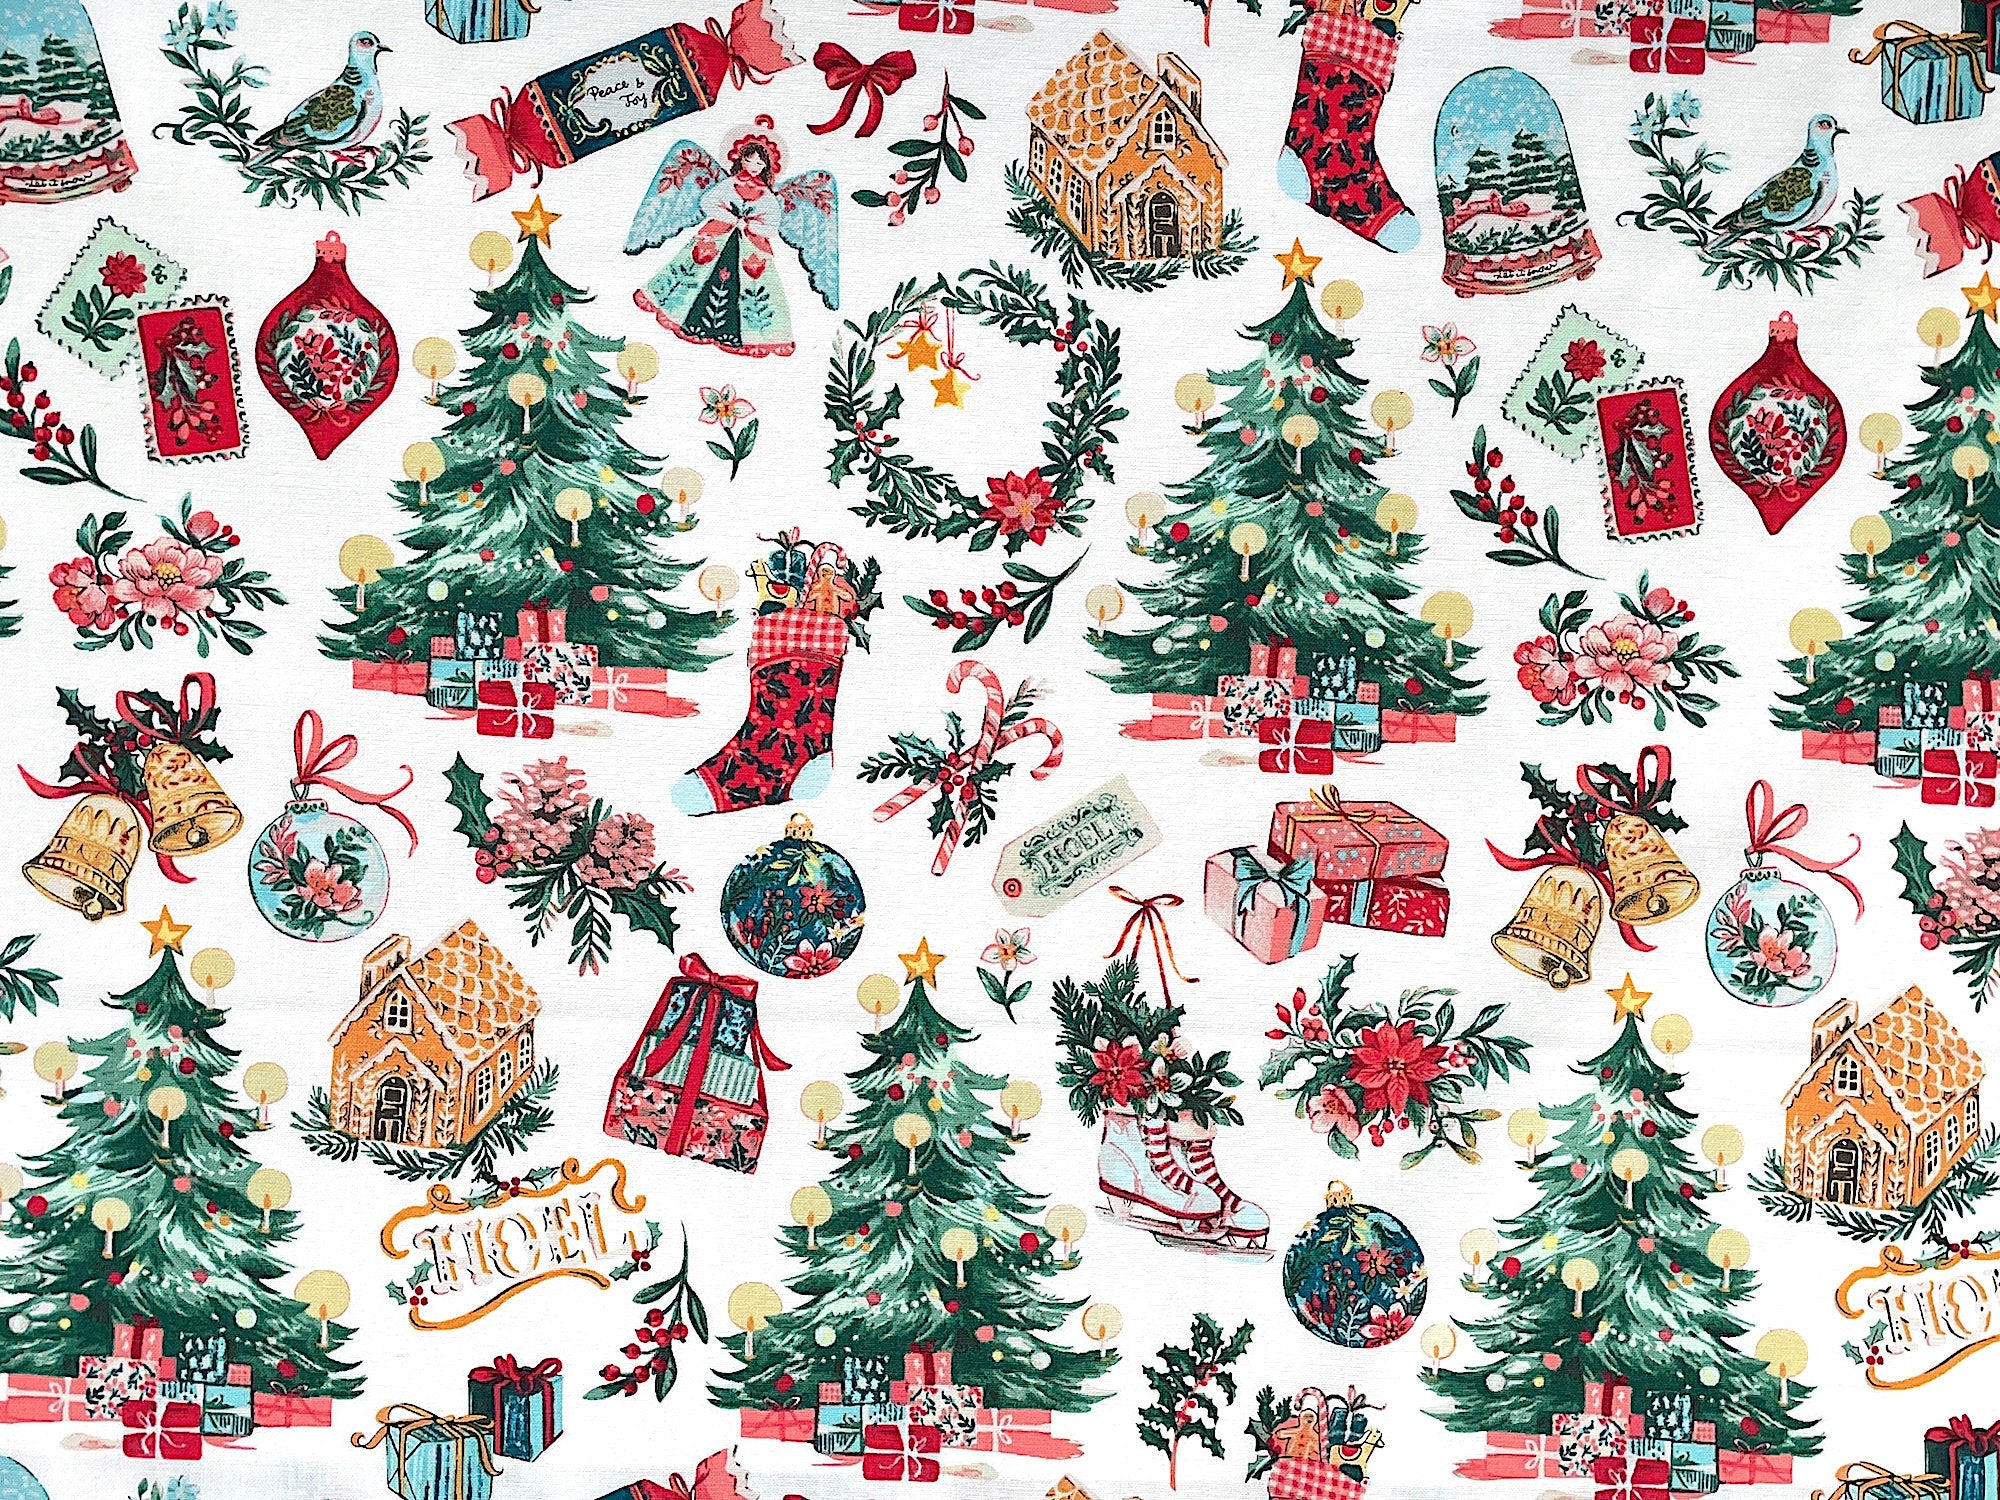 This Christmas fabric is covered with trees, angel tree toppers, stockings, candy canes, gingerbread houses, presents, bells, ornaments, gift tags and more. This fabric is called White Christmas Morning.